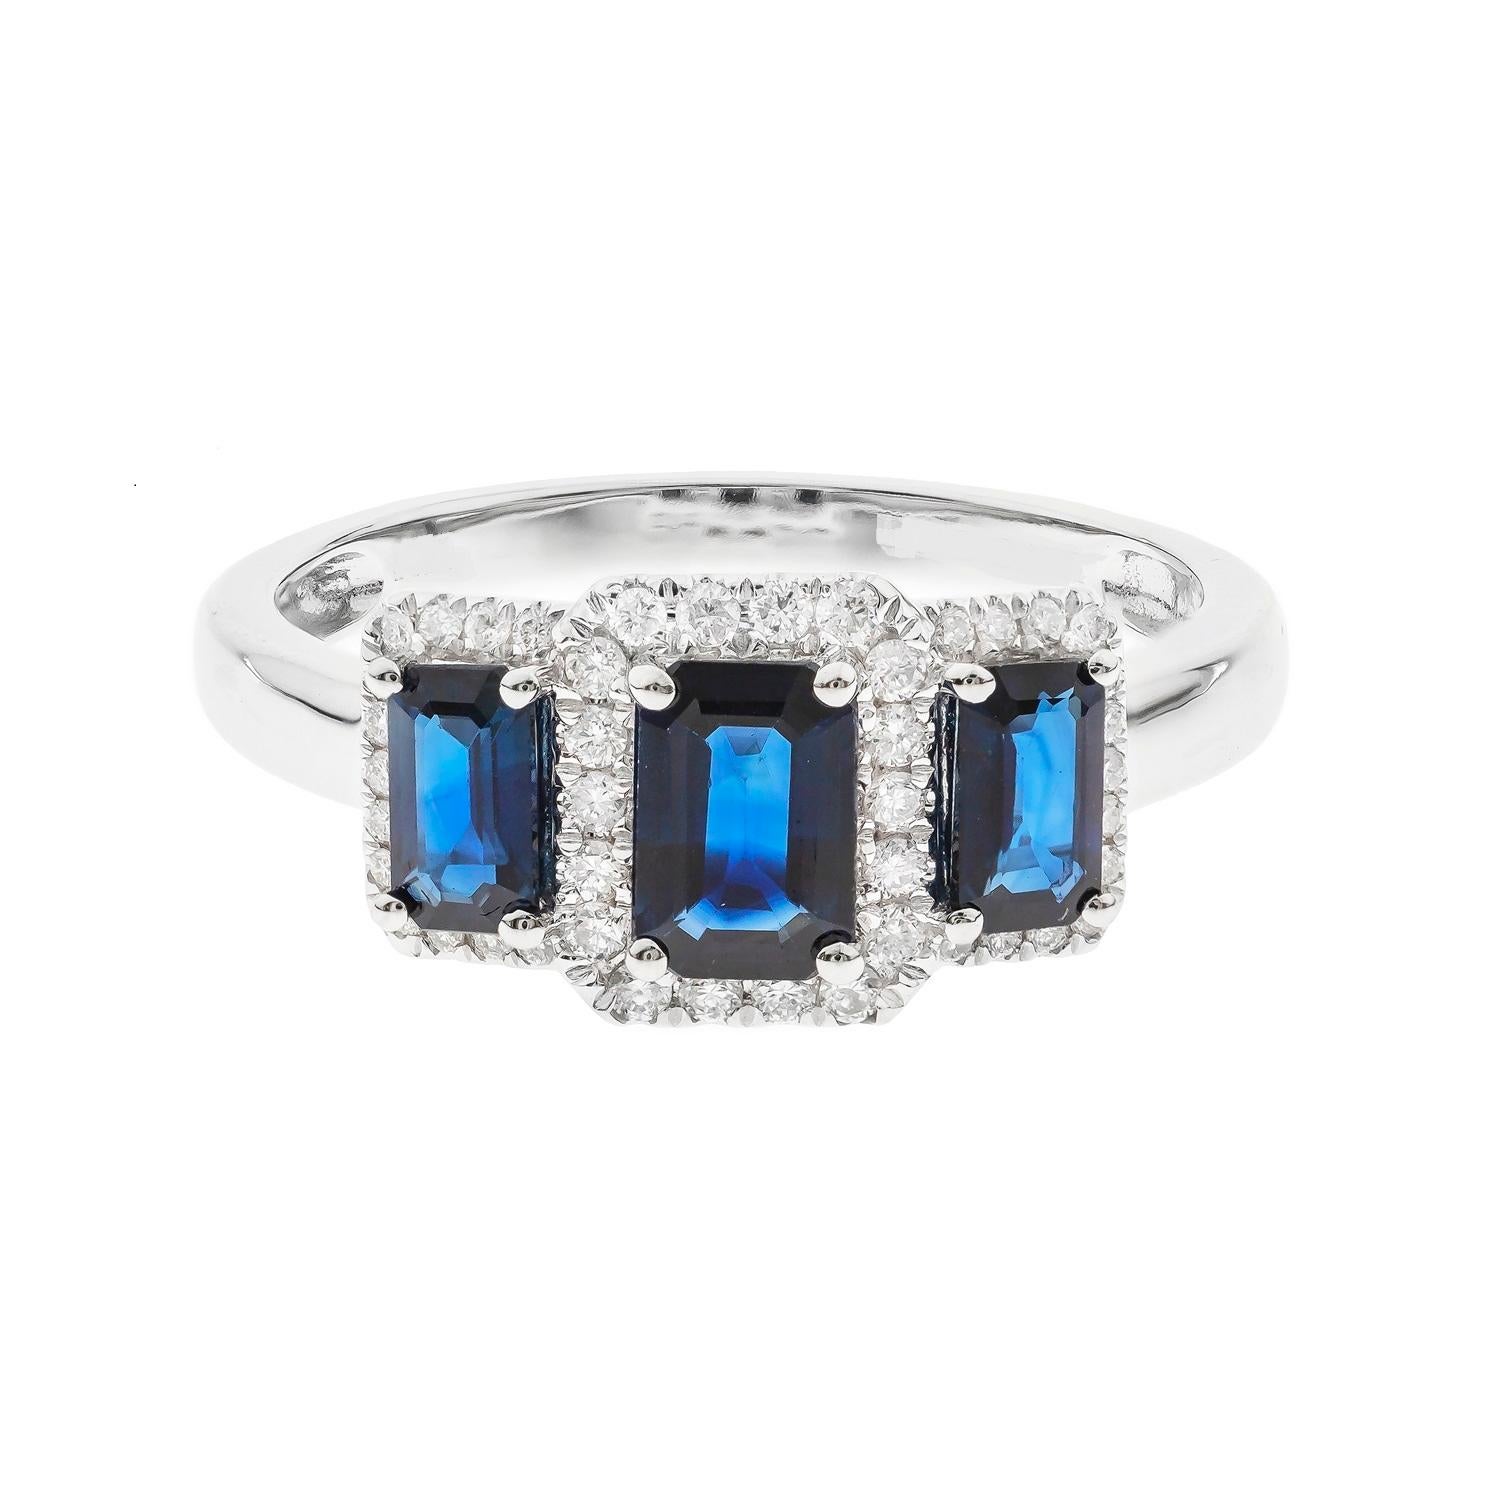 Emerald Cut 1.31 Carat Emerald-Cut Blue Sapphire with Diamond Accents 14K White Gold Ring For Sale